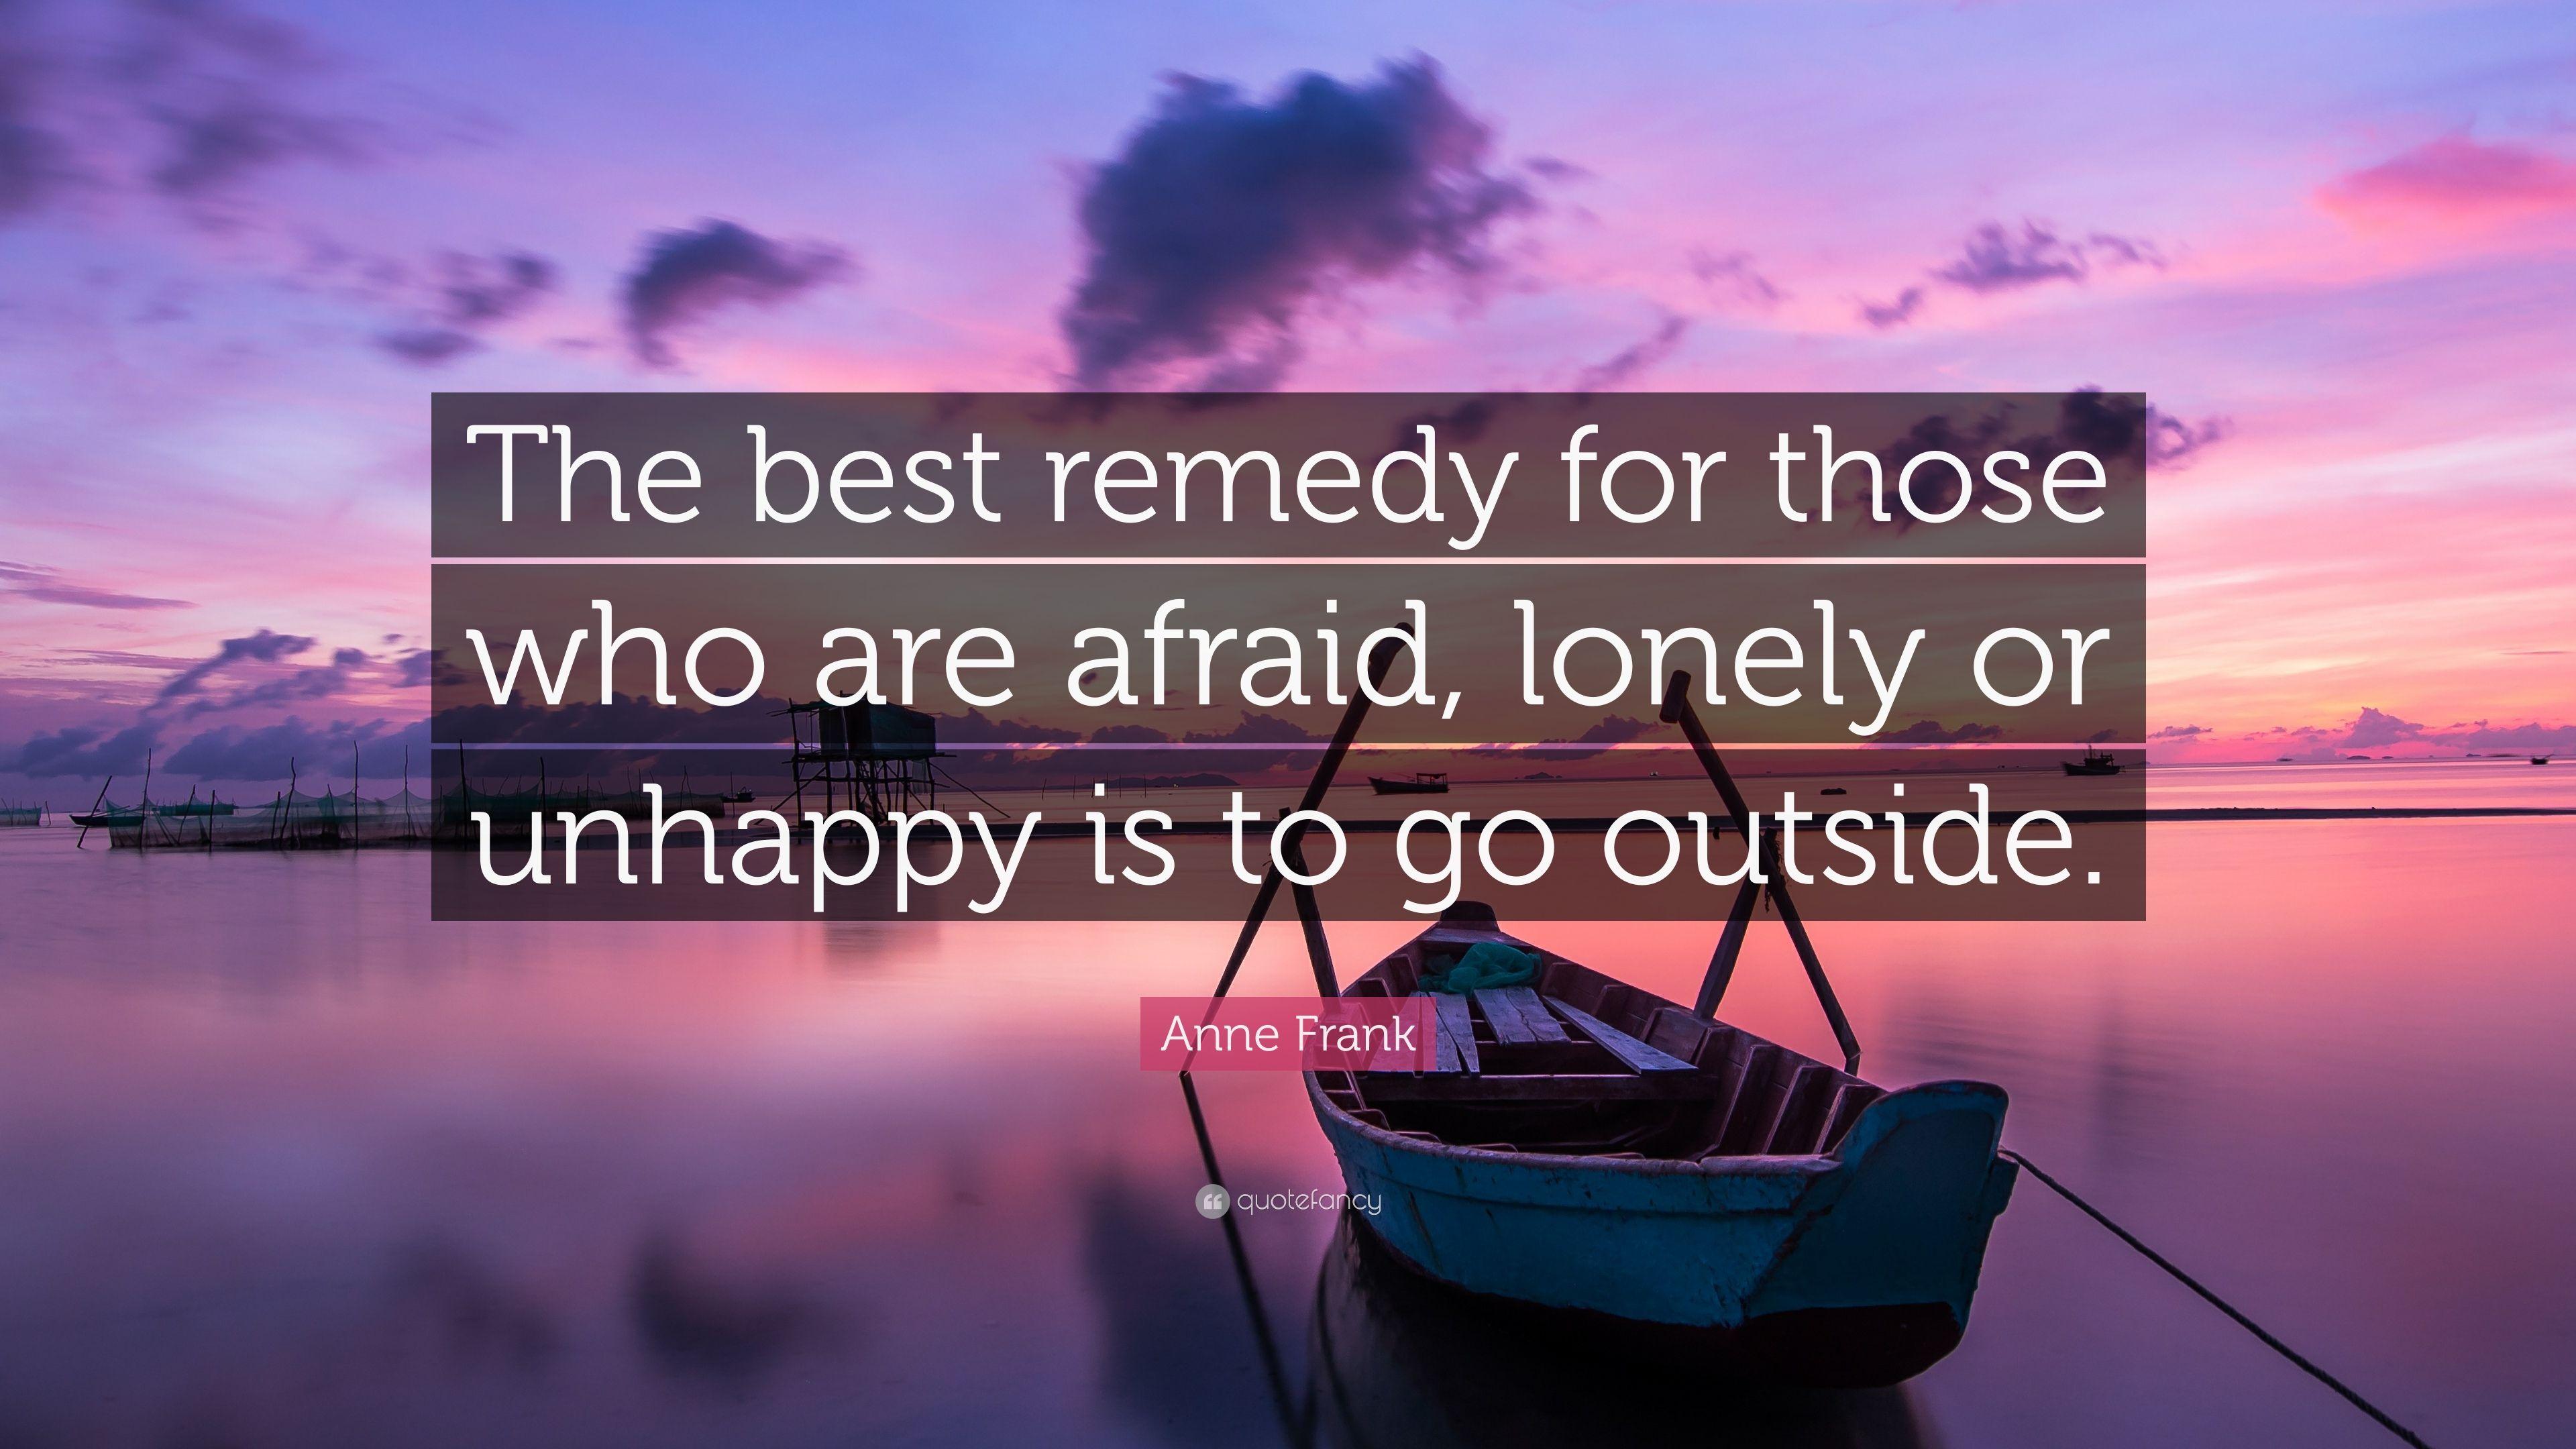 Anne Frank Quote: “The best remedy for those who are afraid, lonely